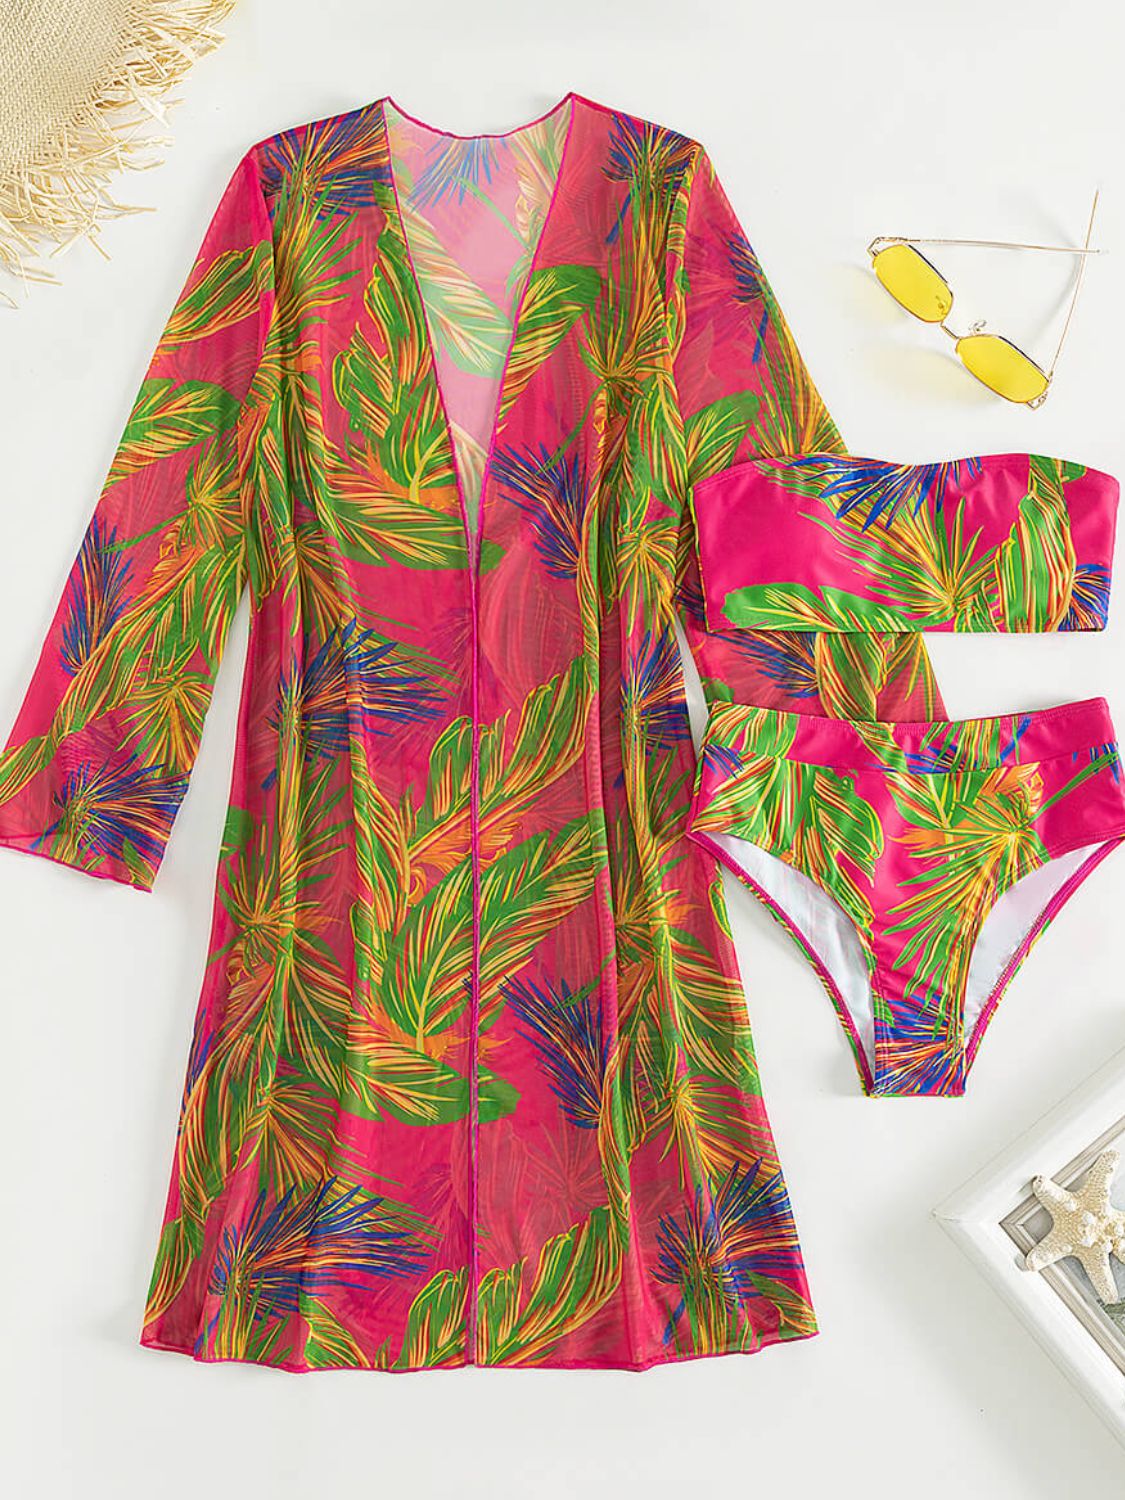 Elevate your beach style with our Roe Swimsuit & Cover-Up Sets. Discover fashion and versatility in our collection of women's swimsuit and cover-up sets designed for a chic and confident beach look.